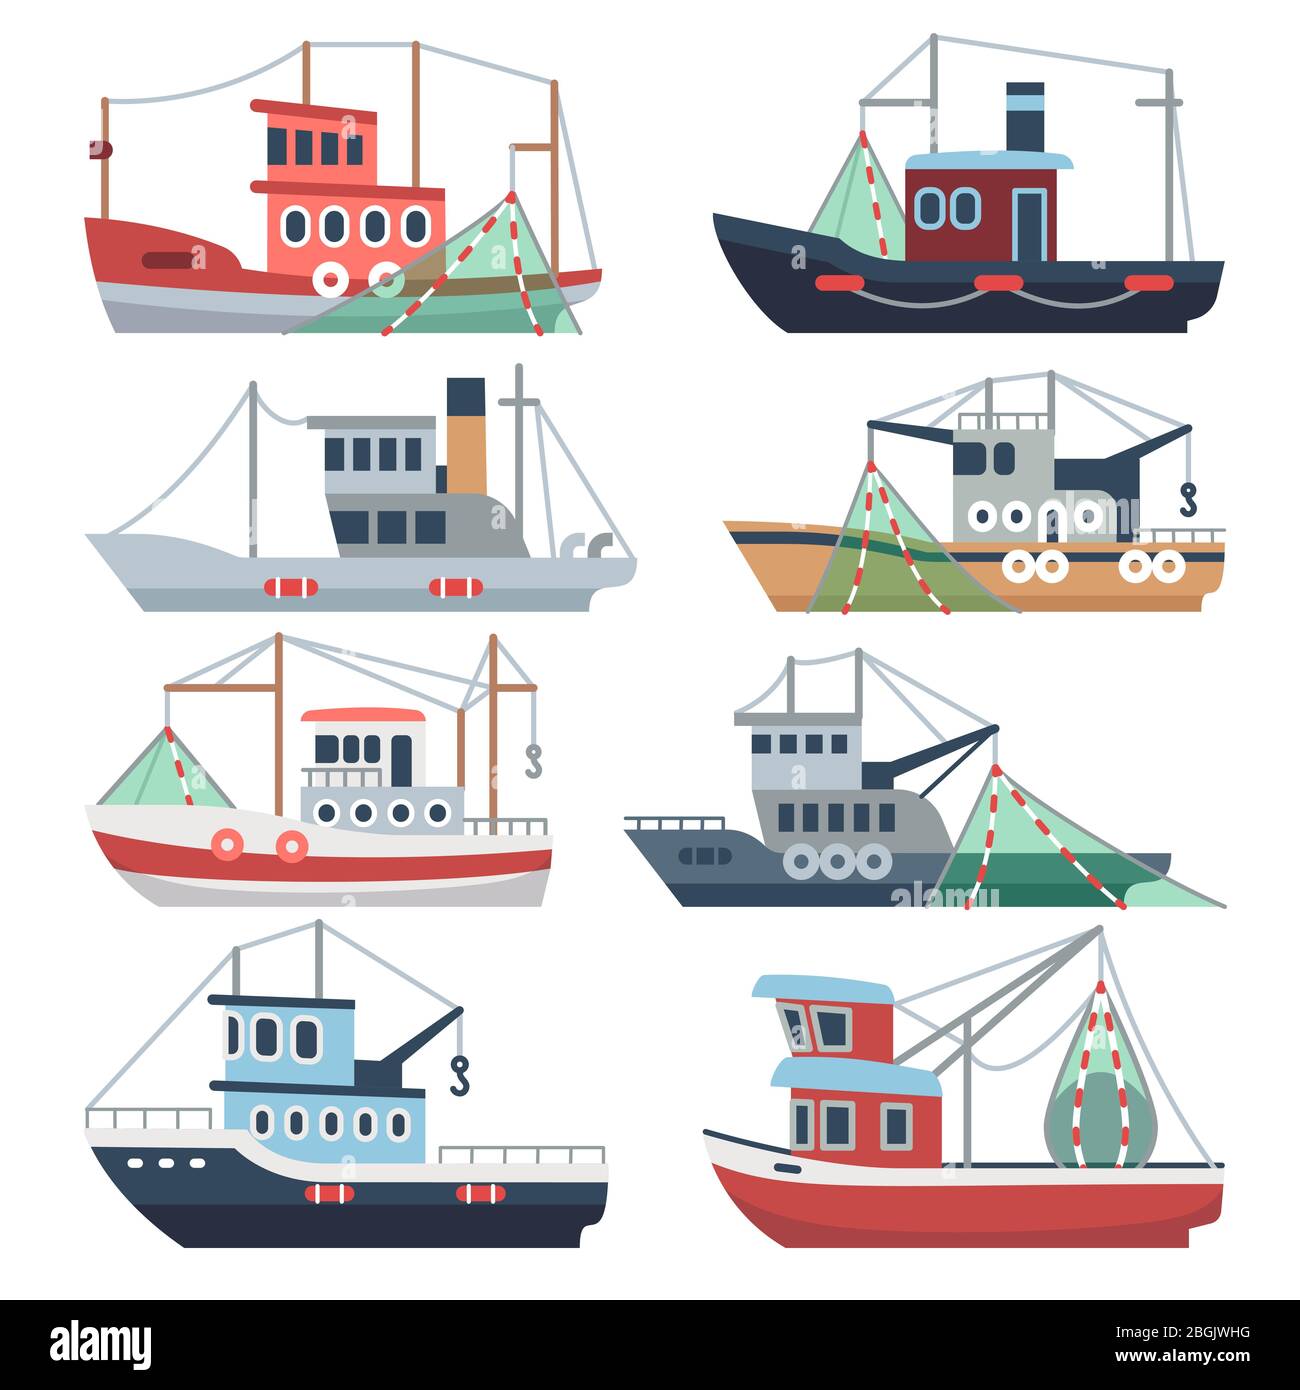 Fishing ocean boats. Commercial trawlers, fisherman ships sea and river vessels isolated vector set. Illustration of catch fish, nautical transport industry Stock Vector